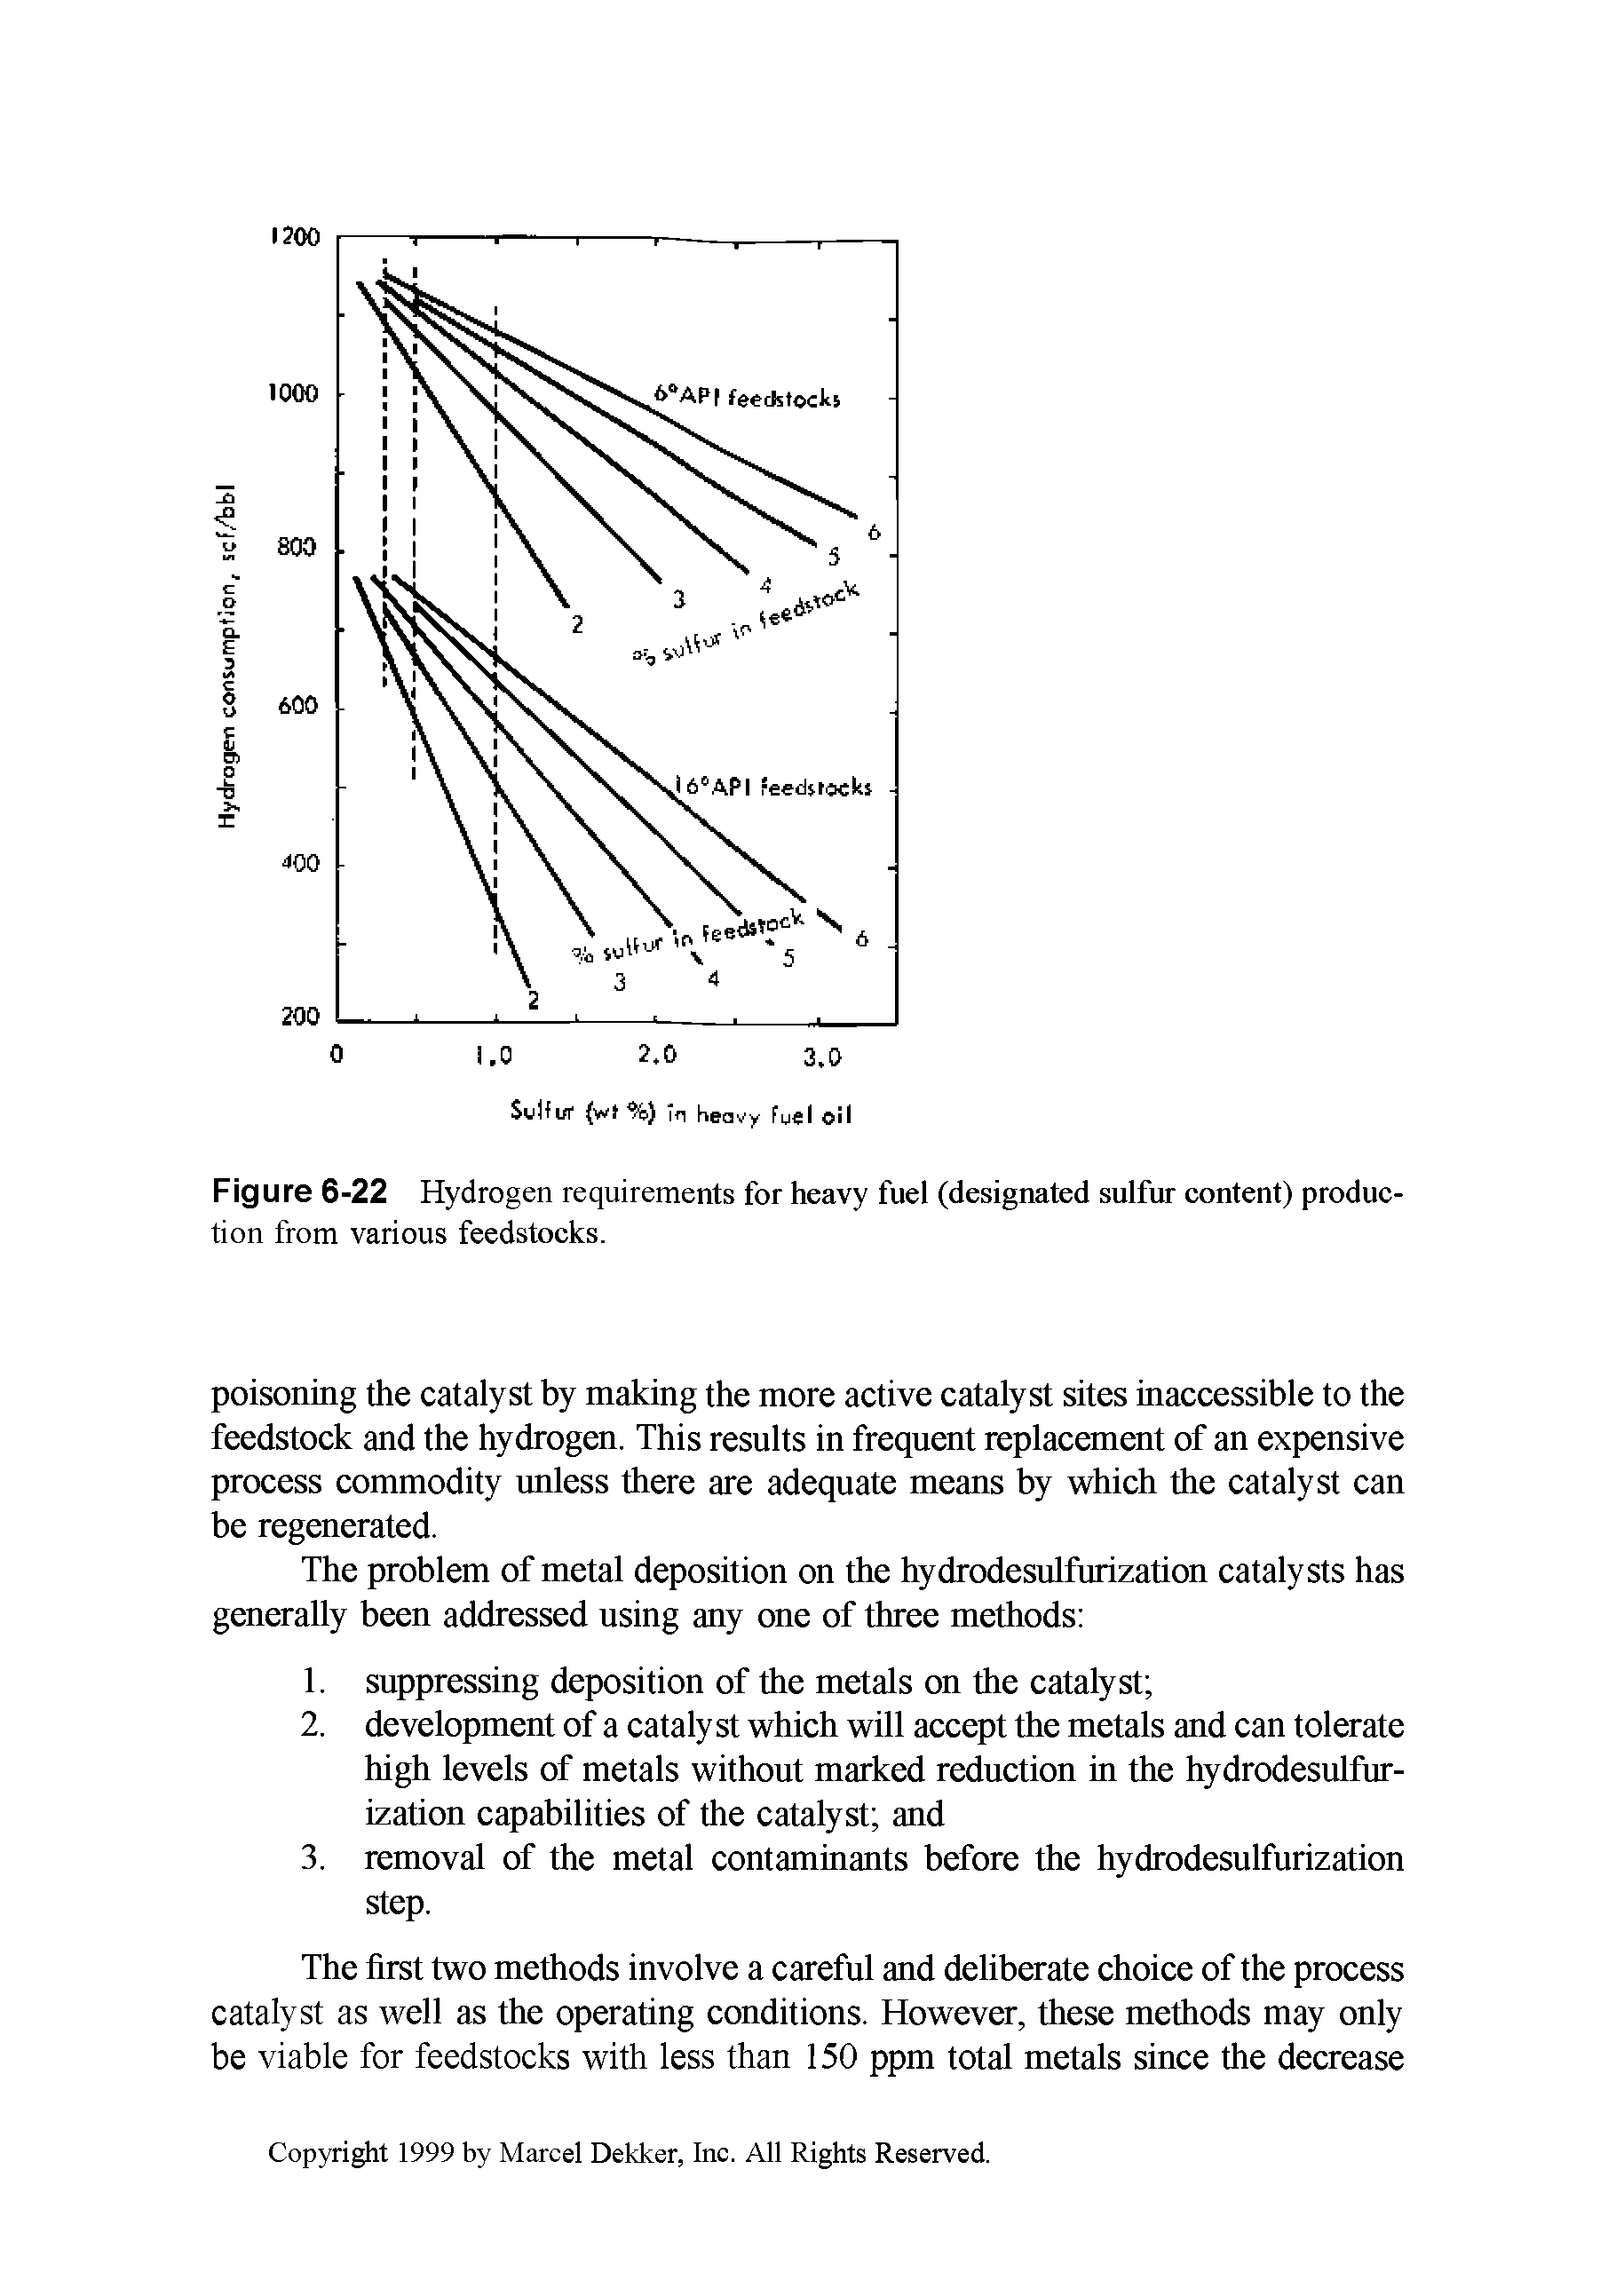 Figure 6-22 Hydrogen requirements for heavy fuel (designated sulfur content) production from various feedstocks.